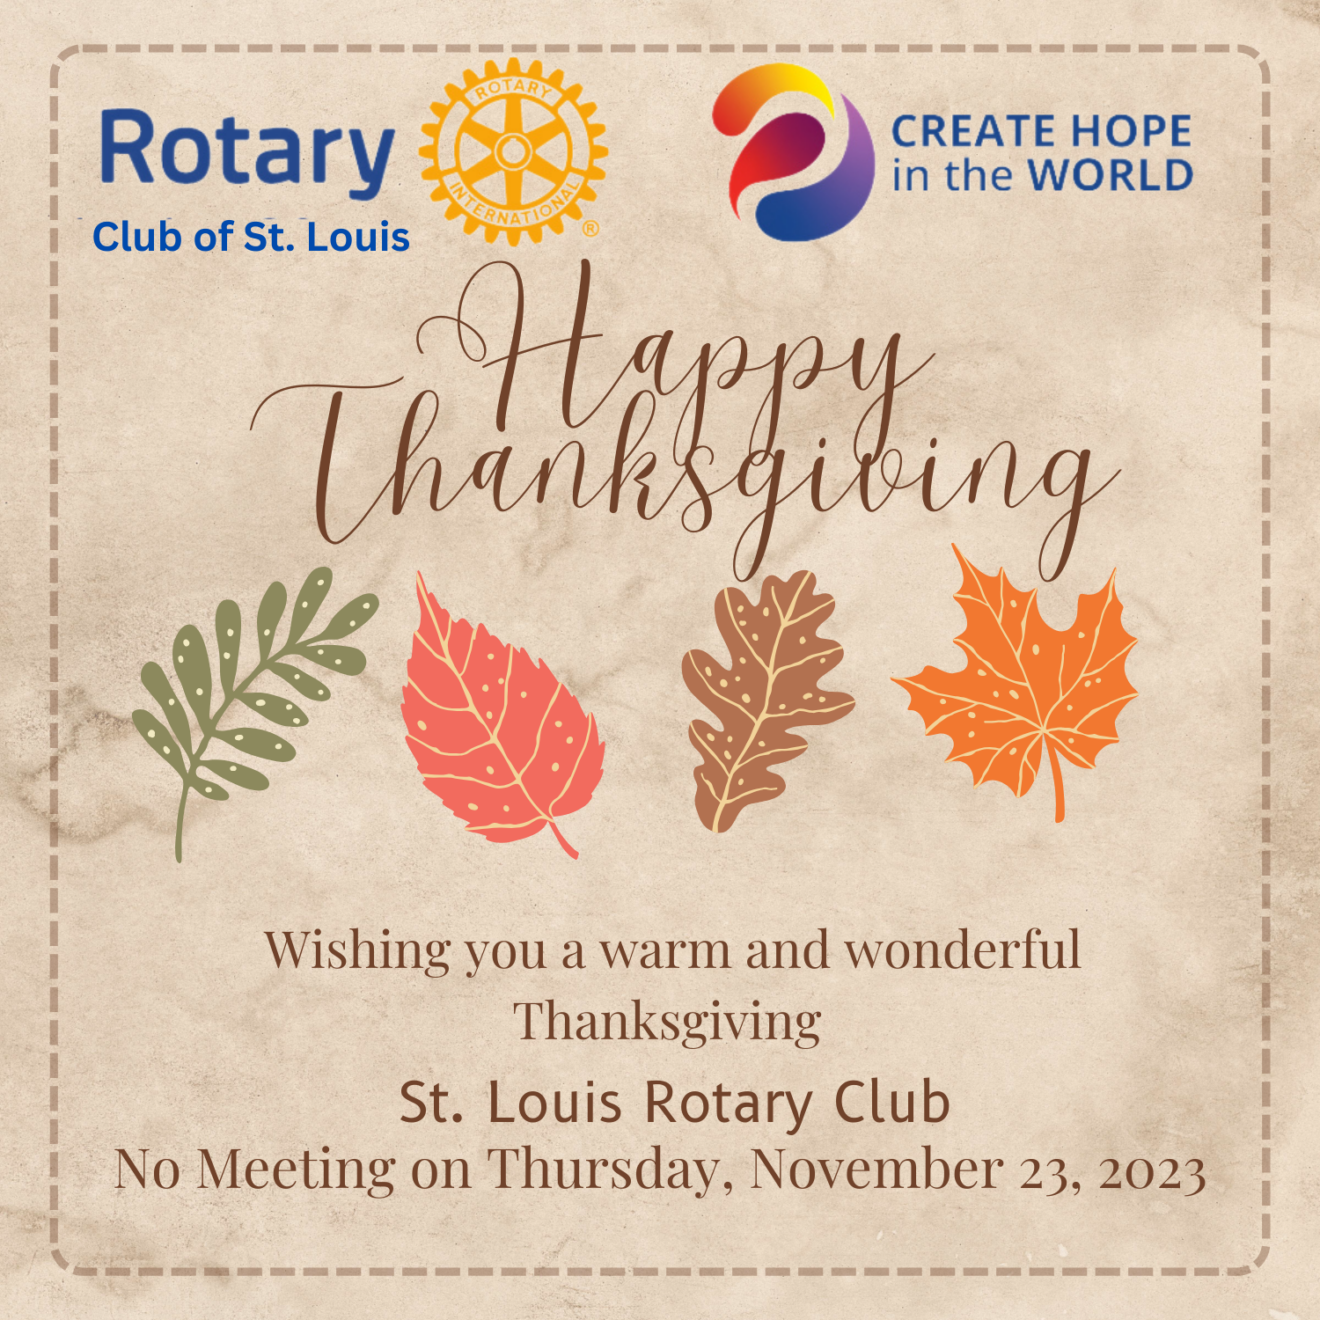 Happy Thanksgiving 11-23-24 - No Rotary Meeting Today